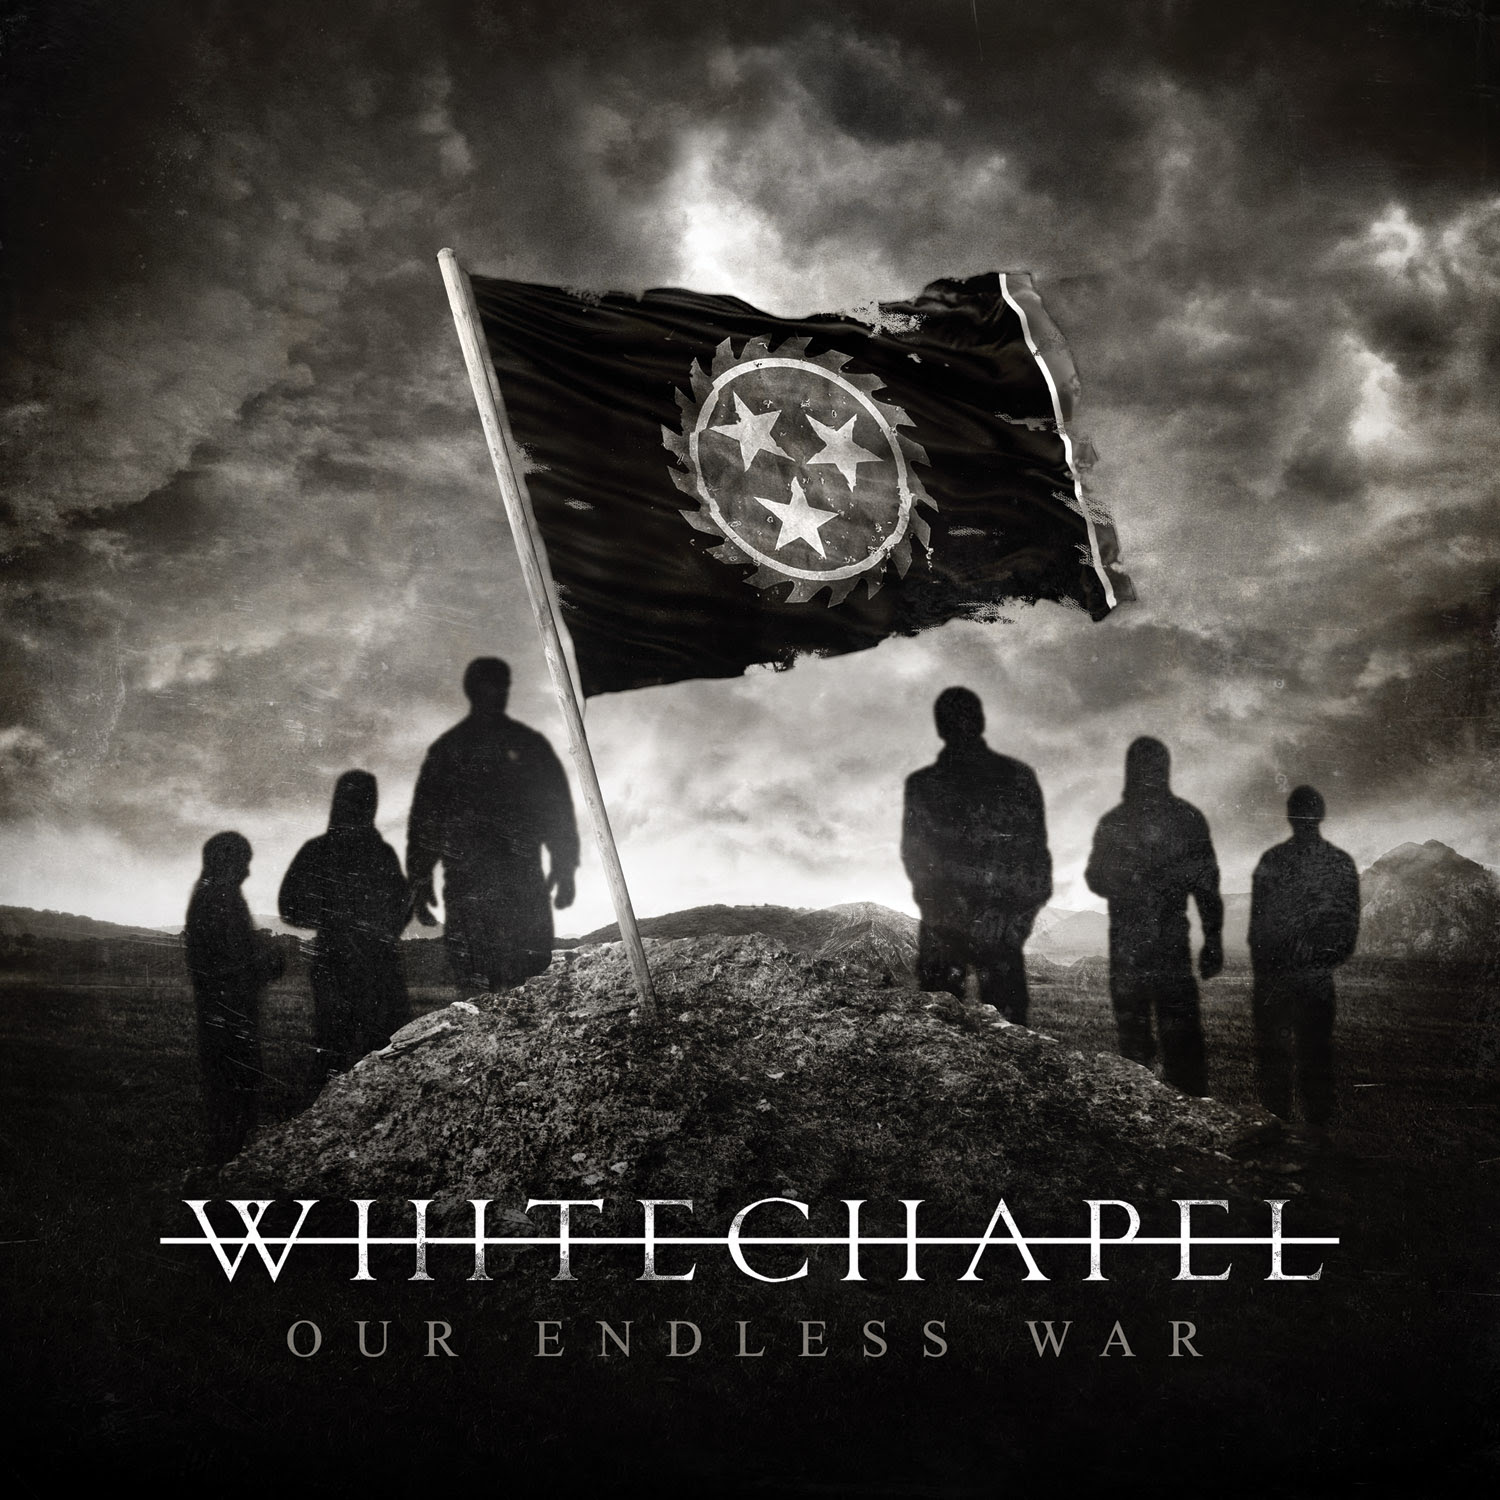 WHITECHAPEL RELEASE DETAILS AND COVER ART FOR NEW ALBUM